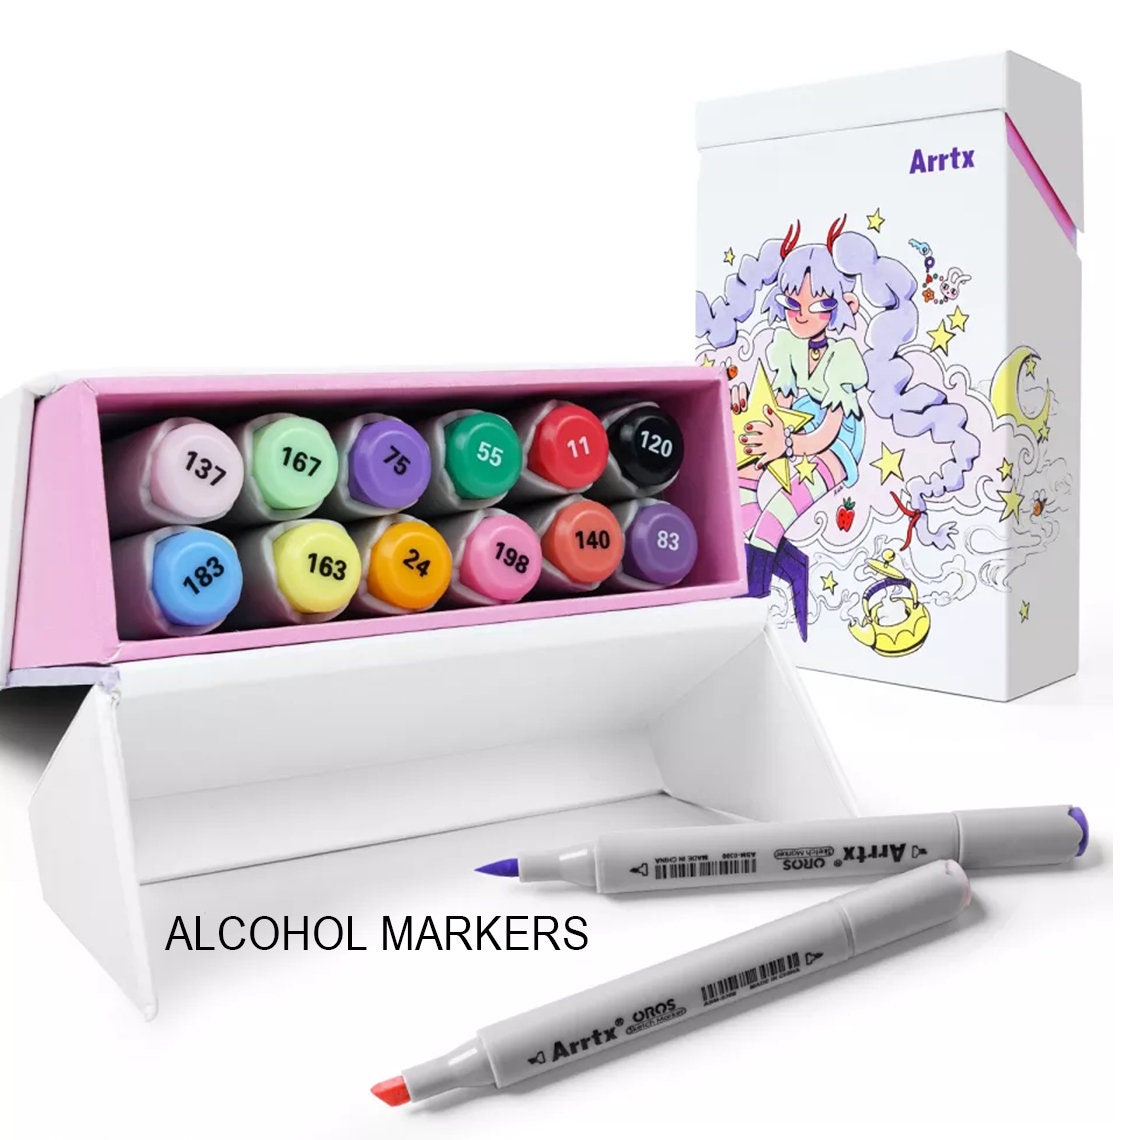  Brled 120 Colors Alcohol Markers with Free App, Alcohol-Based  Markers for Artists, Art Markers for Painting, Coloring, Sketching and  Drawing, Chisel and Fine Tip, Great Gift Idea. : Arts, Crafts